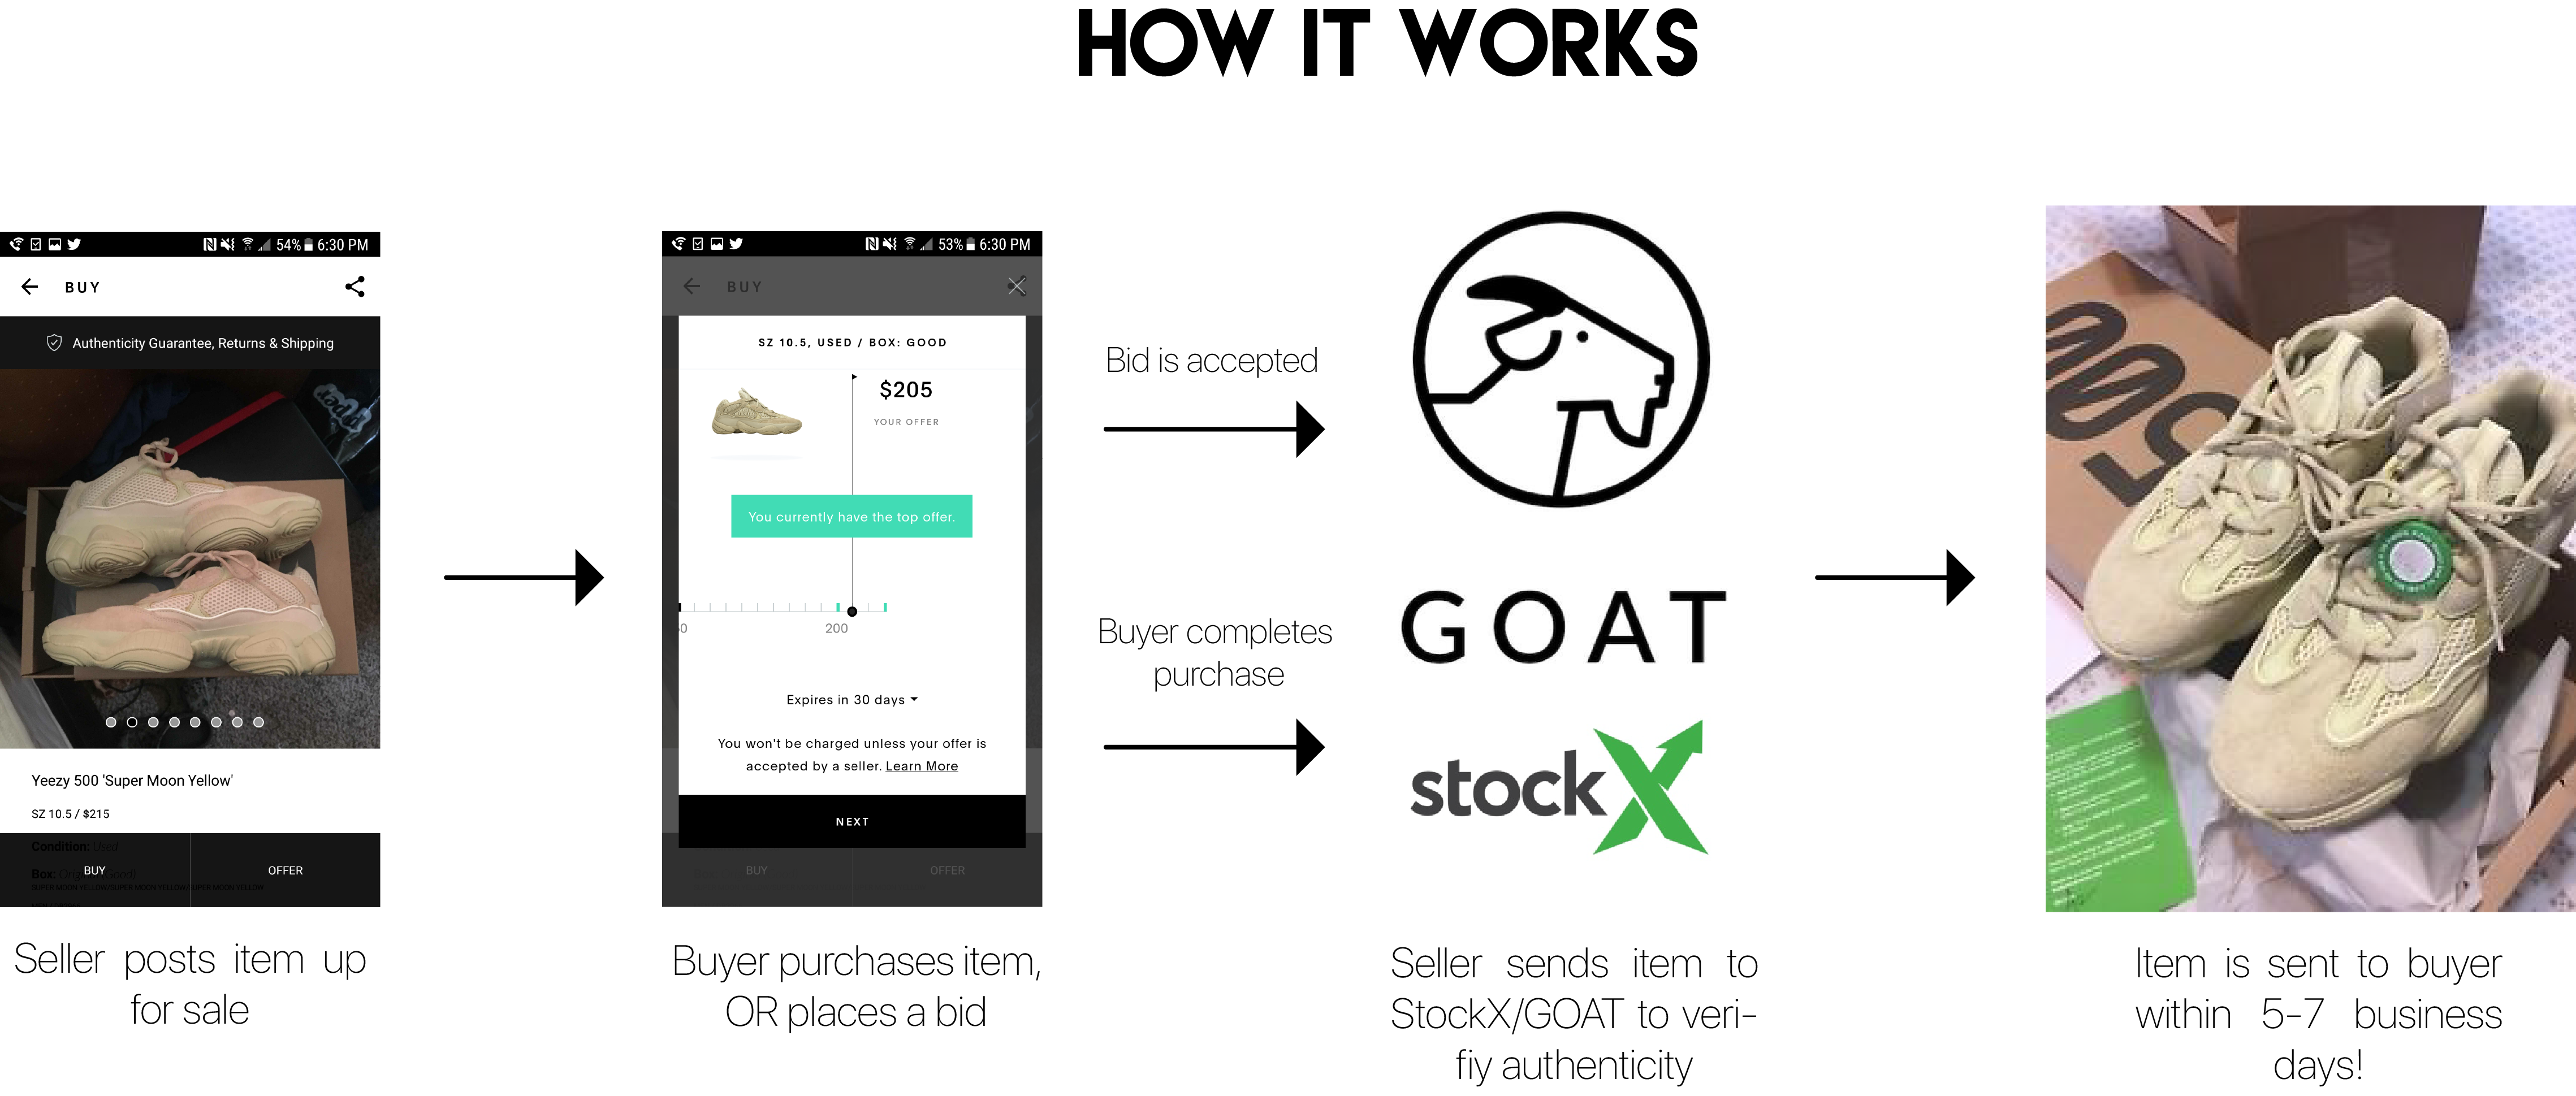 goat or stockx selling